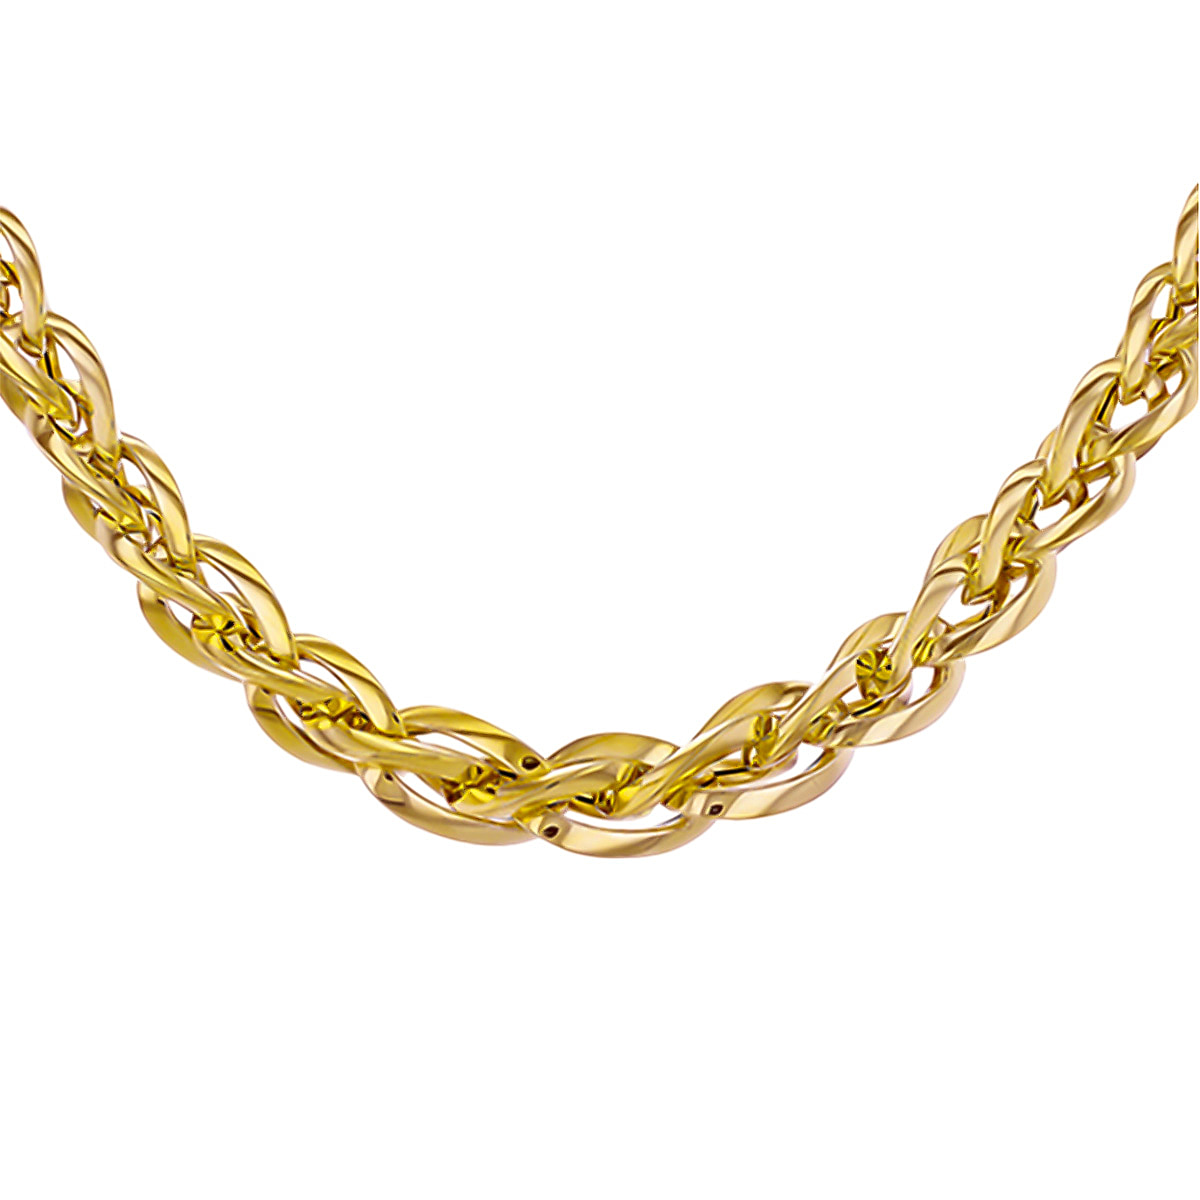 Designer Inspired Closeout - 9K Yellow Gold Woven Link Necklace (Size - 18), Gold Wt. 14.38 Gms